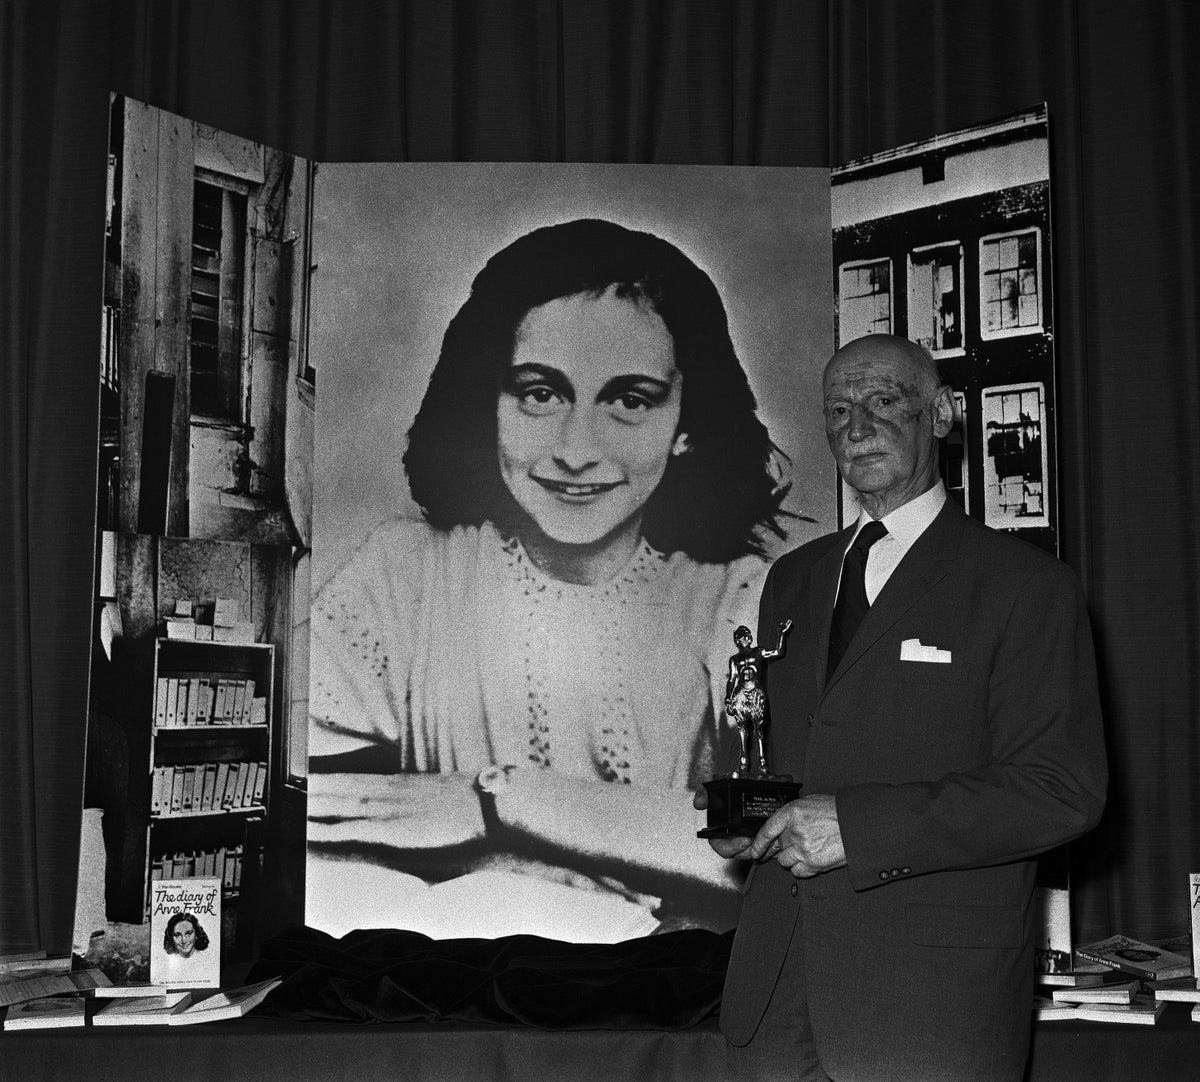 Graphic version of Anne Frank book removed by Florida school